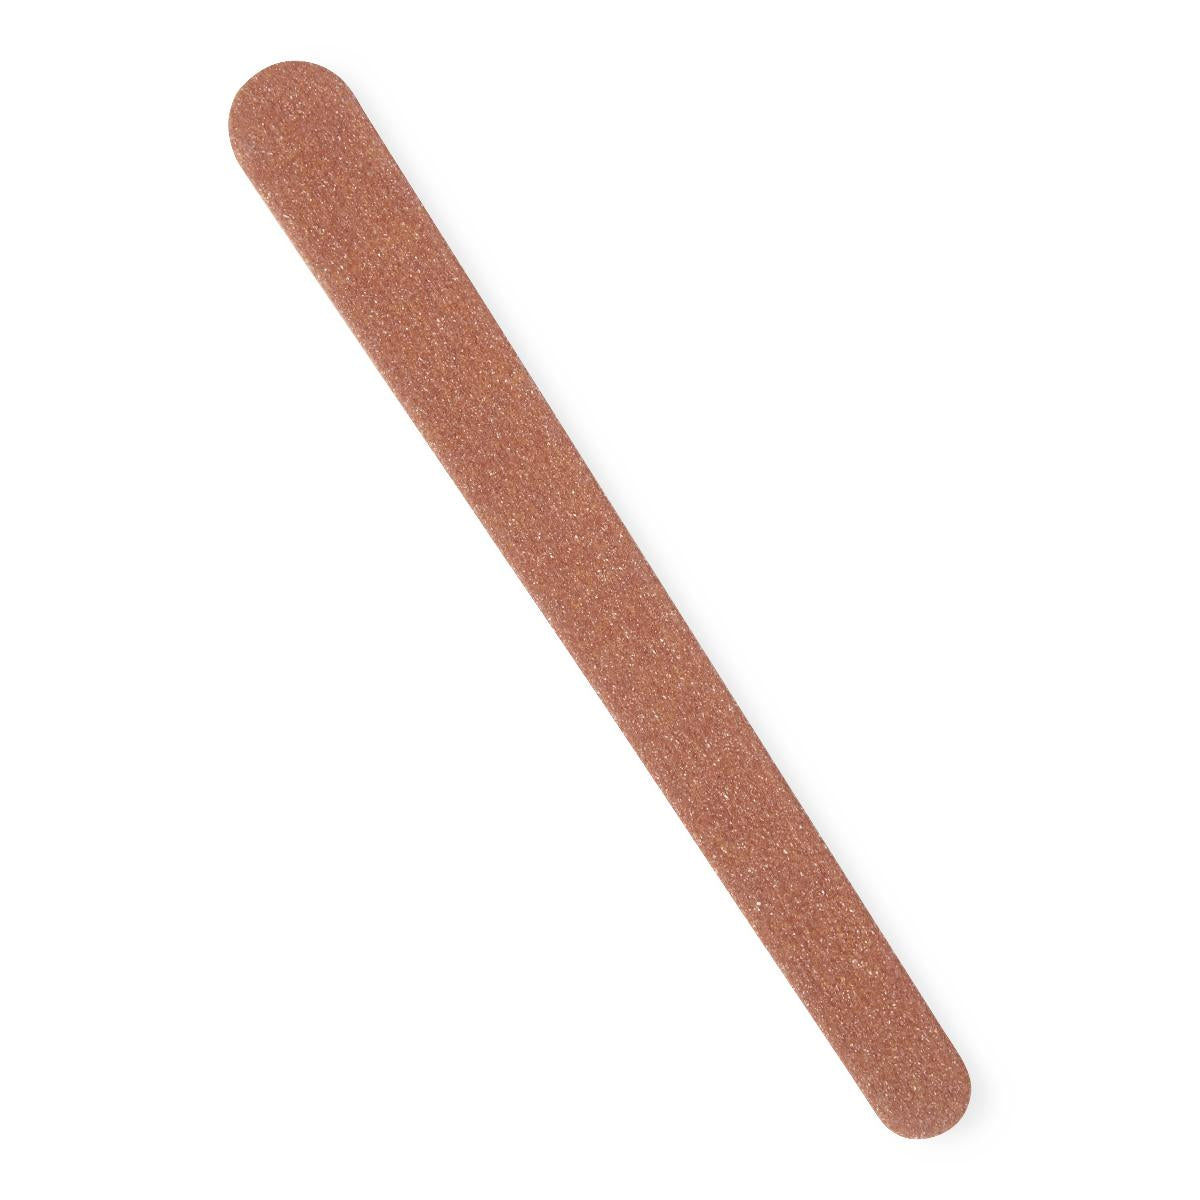 144 Each-Gross / Orange - Nail File Included Nursing Supplies & Patient Care - MEDLINE - Wasatch Medical Supply